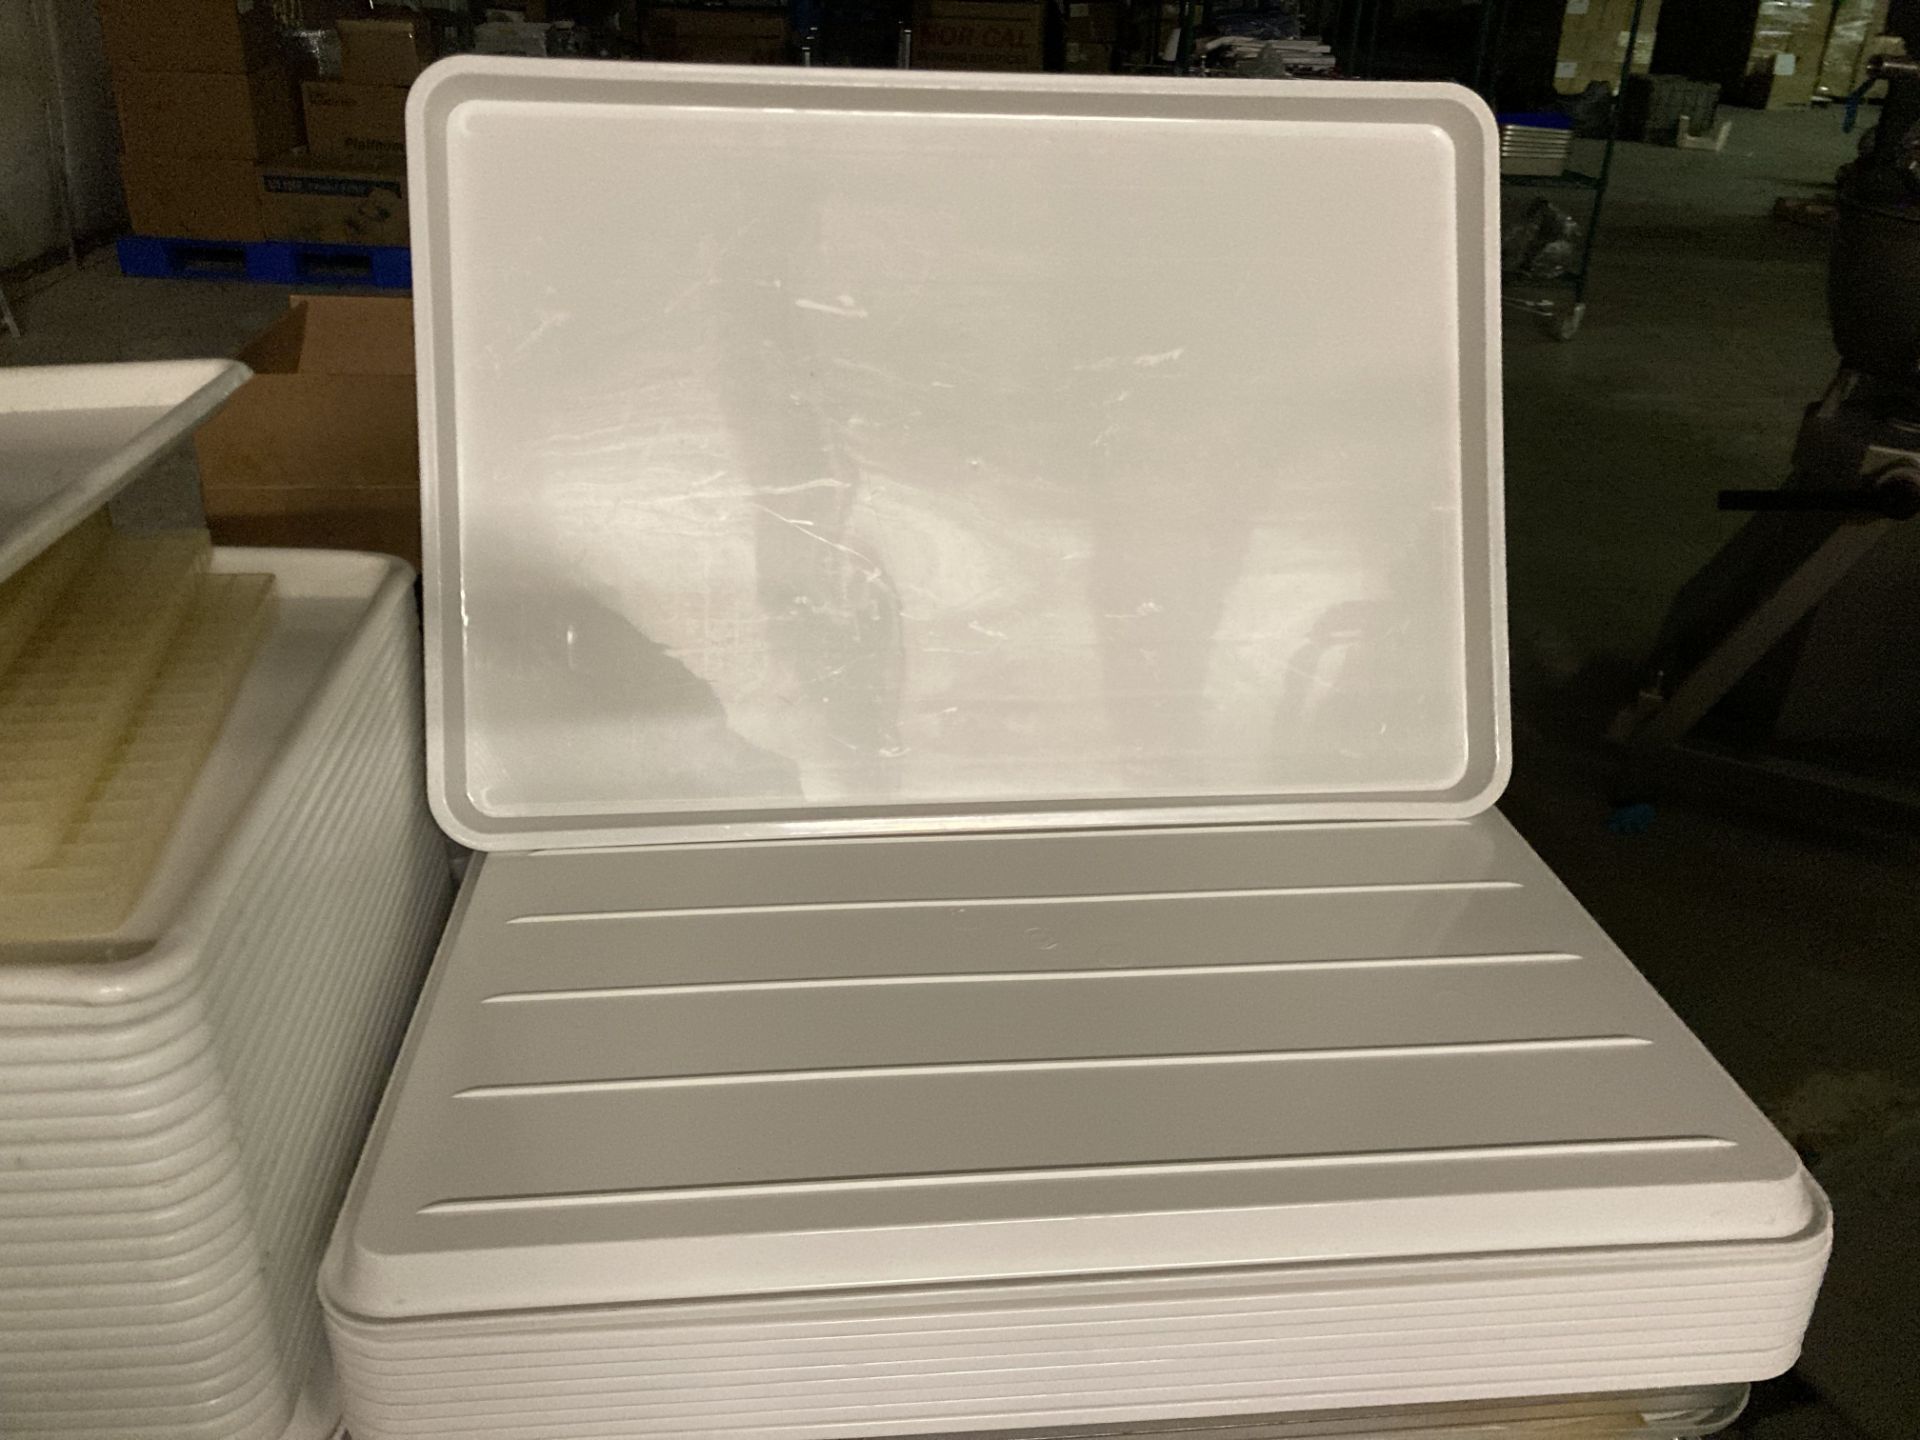 Omcan 14244 Plastic Sheet Trays. Lot of 100 plastic sheet trays. 18"x26", fits bakers racks, great - Image 2 of 3